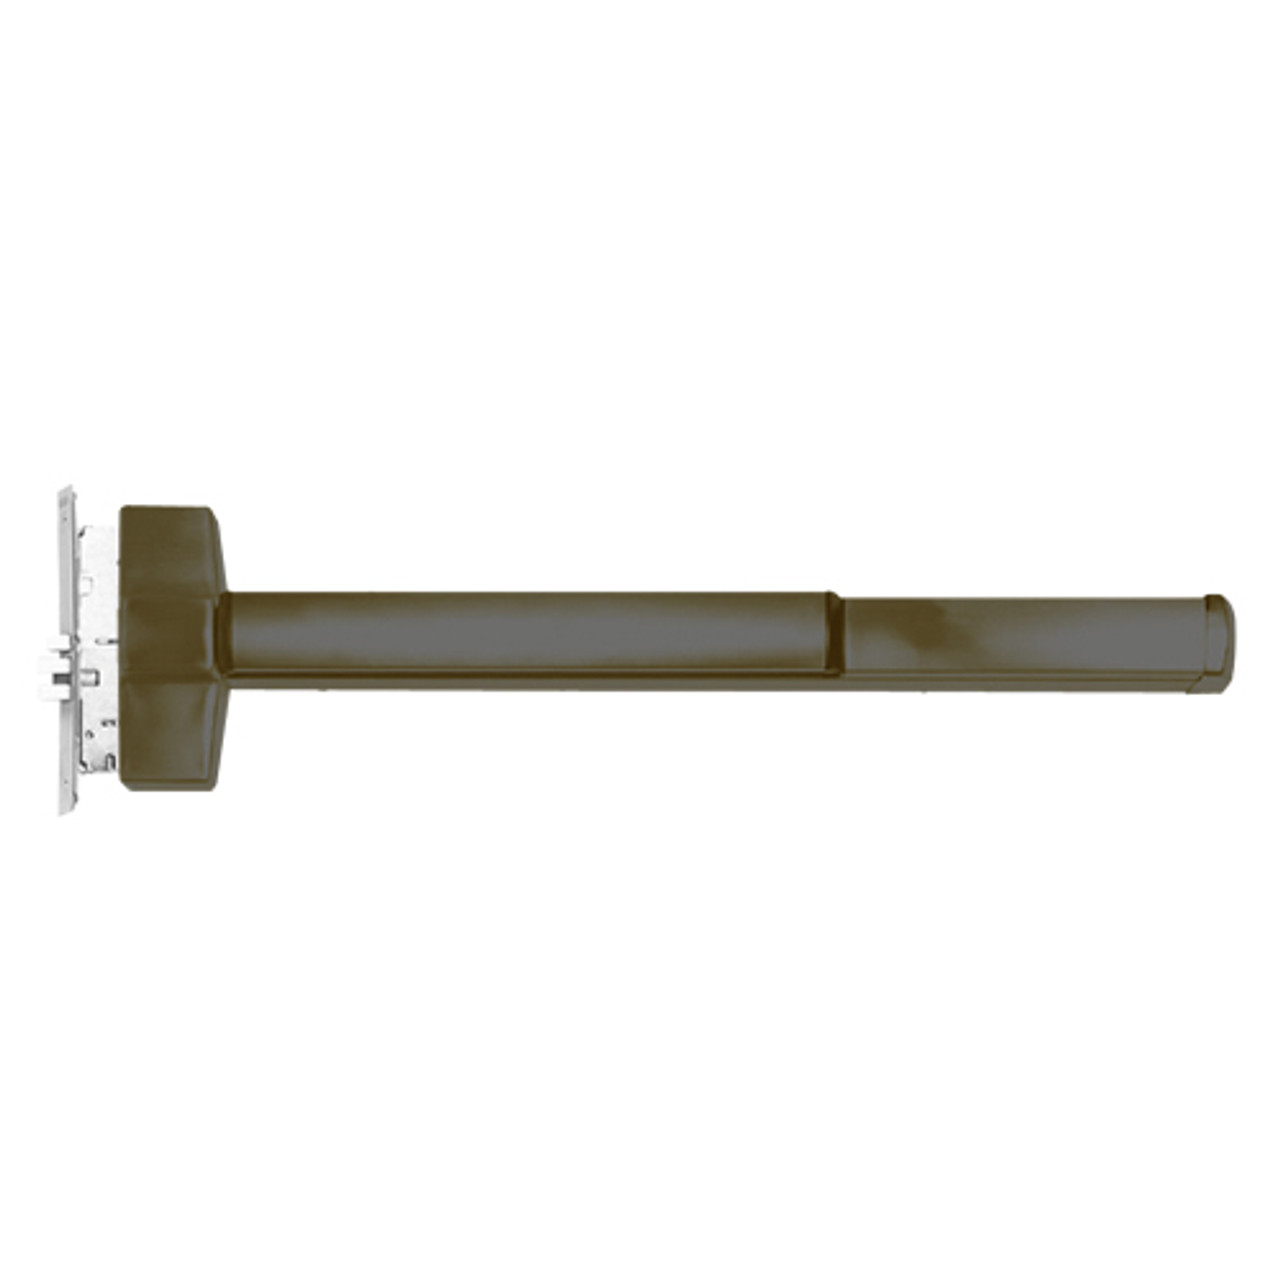 ED5600ALD-613-RHR Corbin ED5600 Series Fire Rated Mortise Exit Device with Delayed Egress in Oil Rubbed Bronze Finish